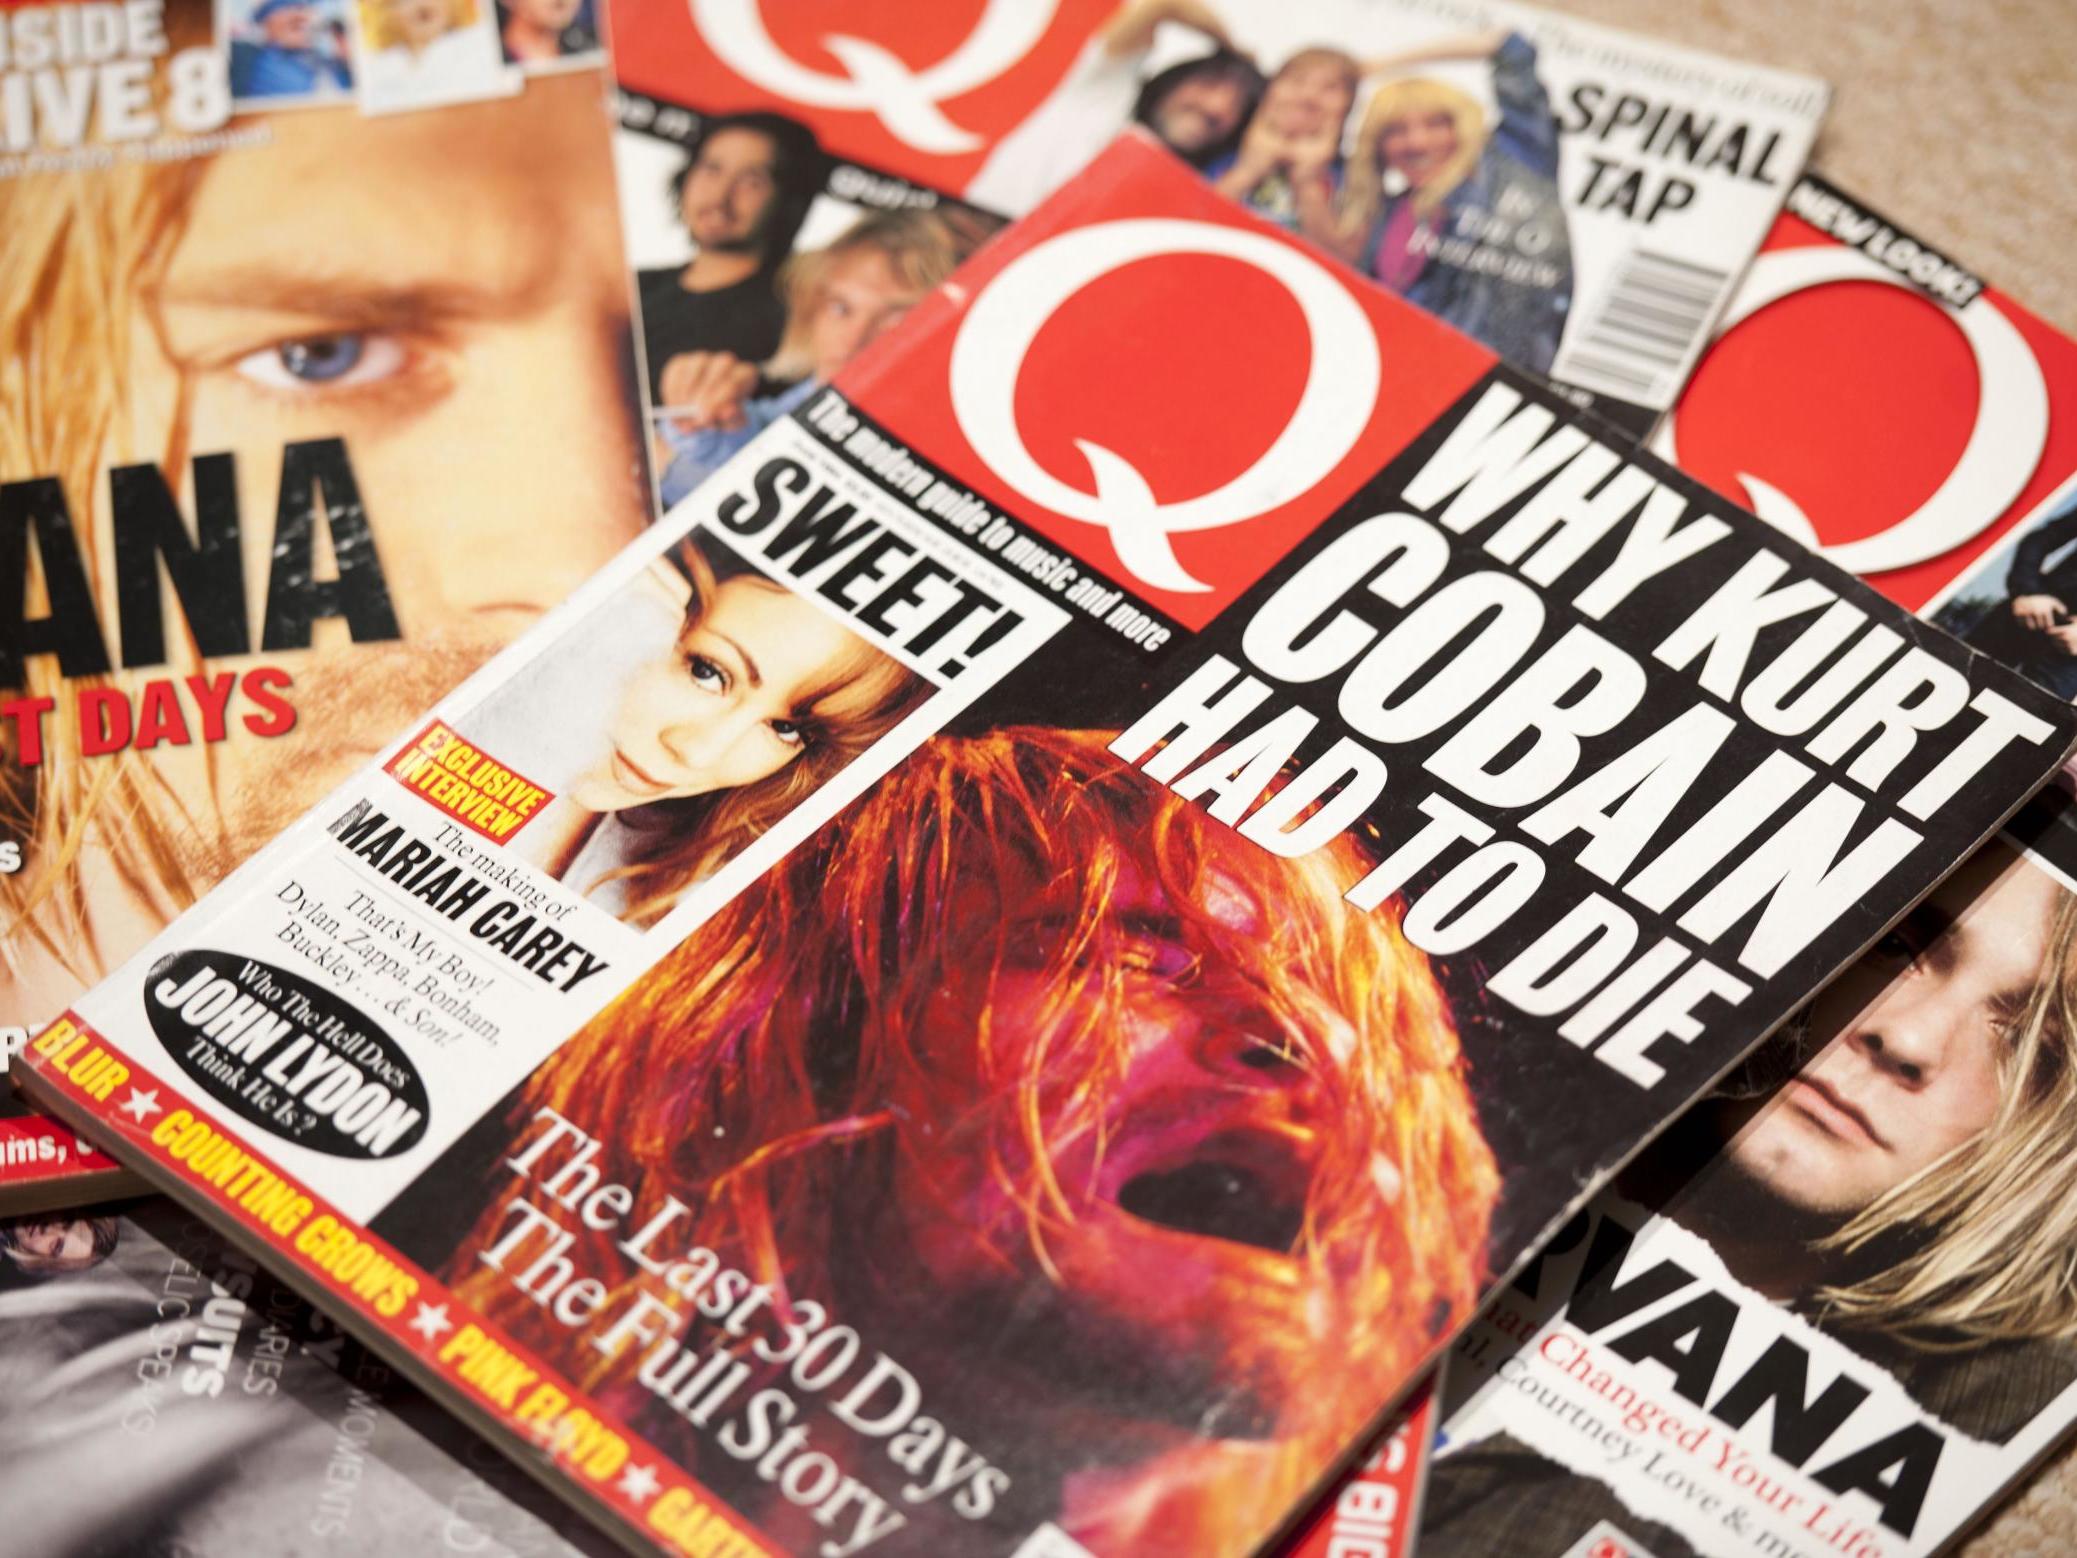 q-magazine-to-close-after-34-years-the-independent-the-independent